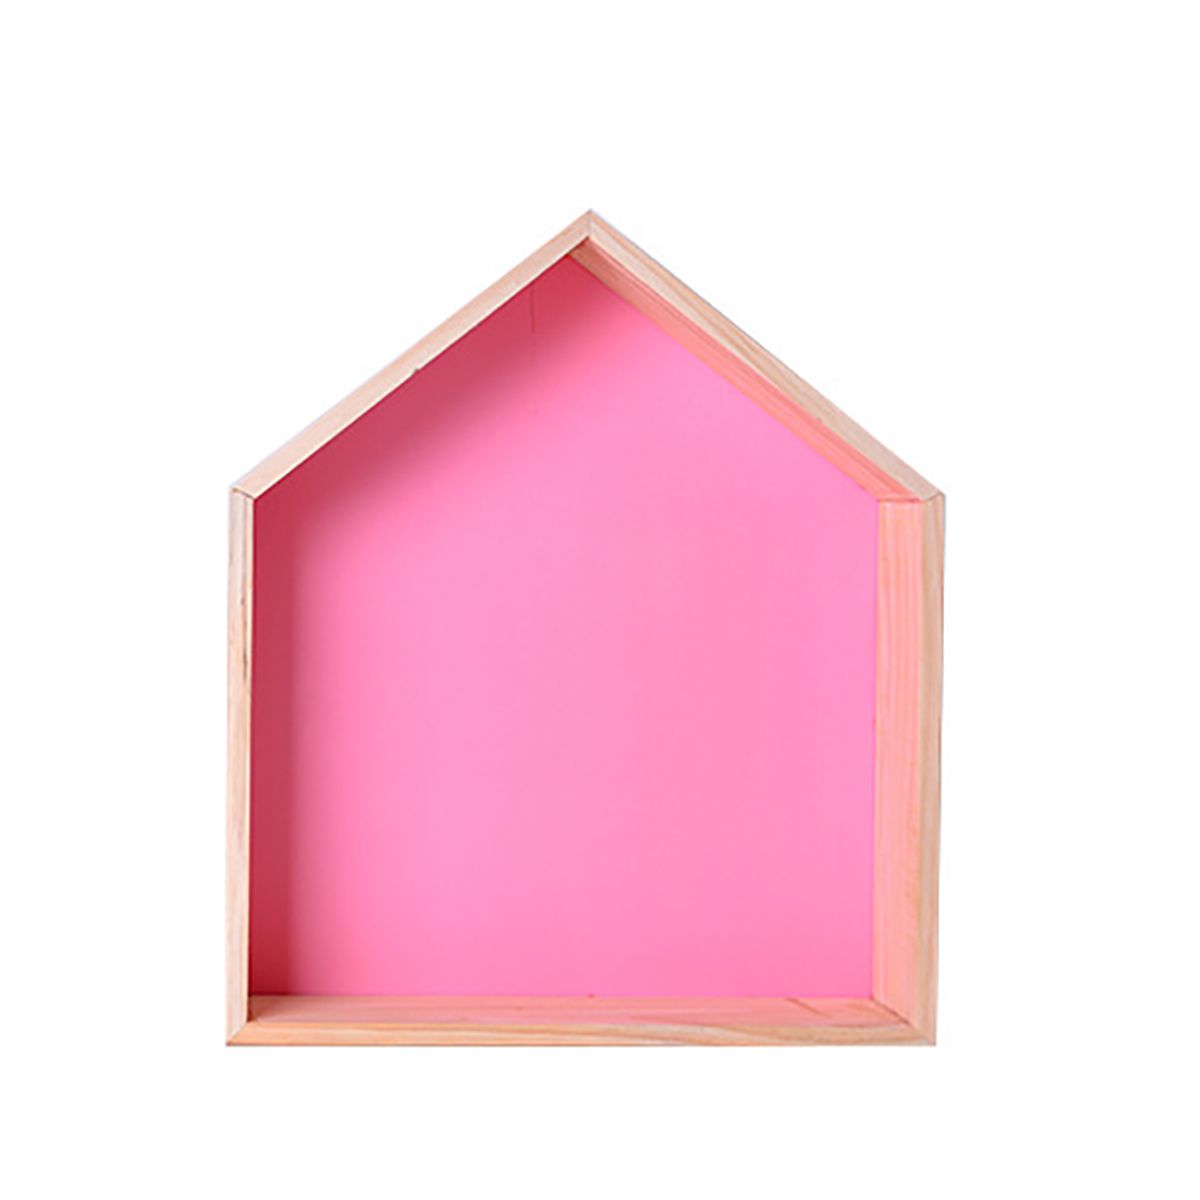 Wooden-House-Shape-Wall-Hanging-Shelf-Toy-Storage-Rack-Home-Decorations-1596614